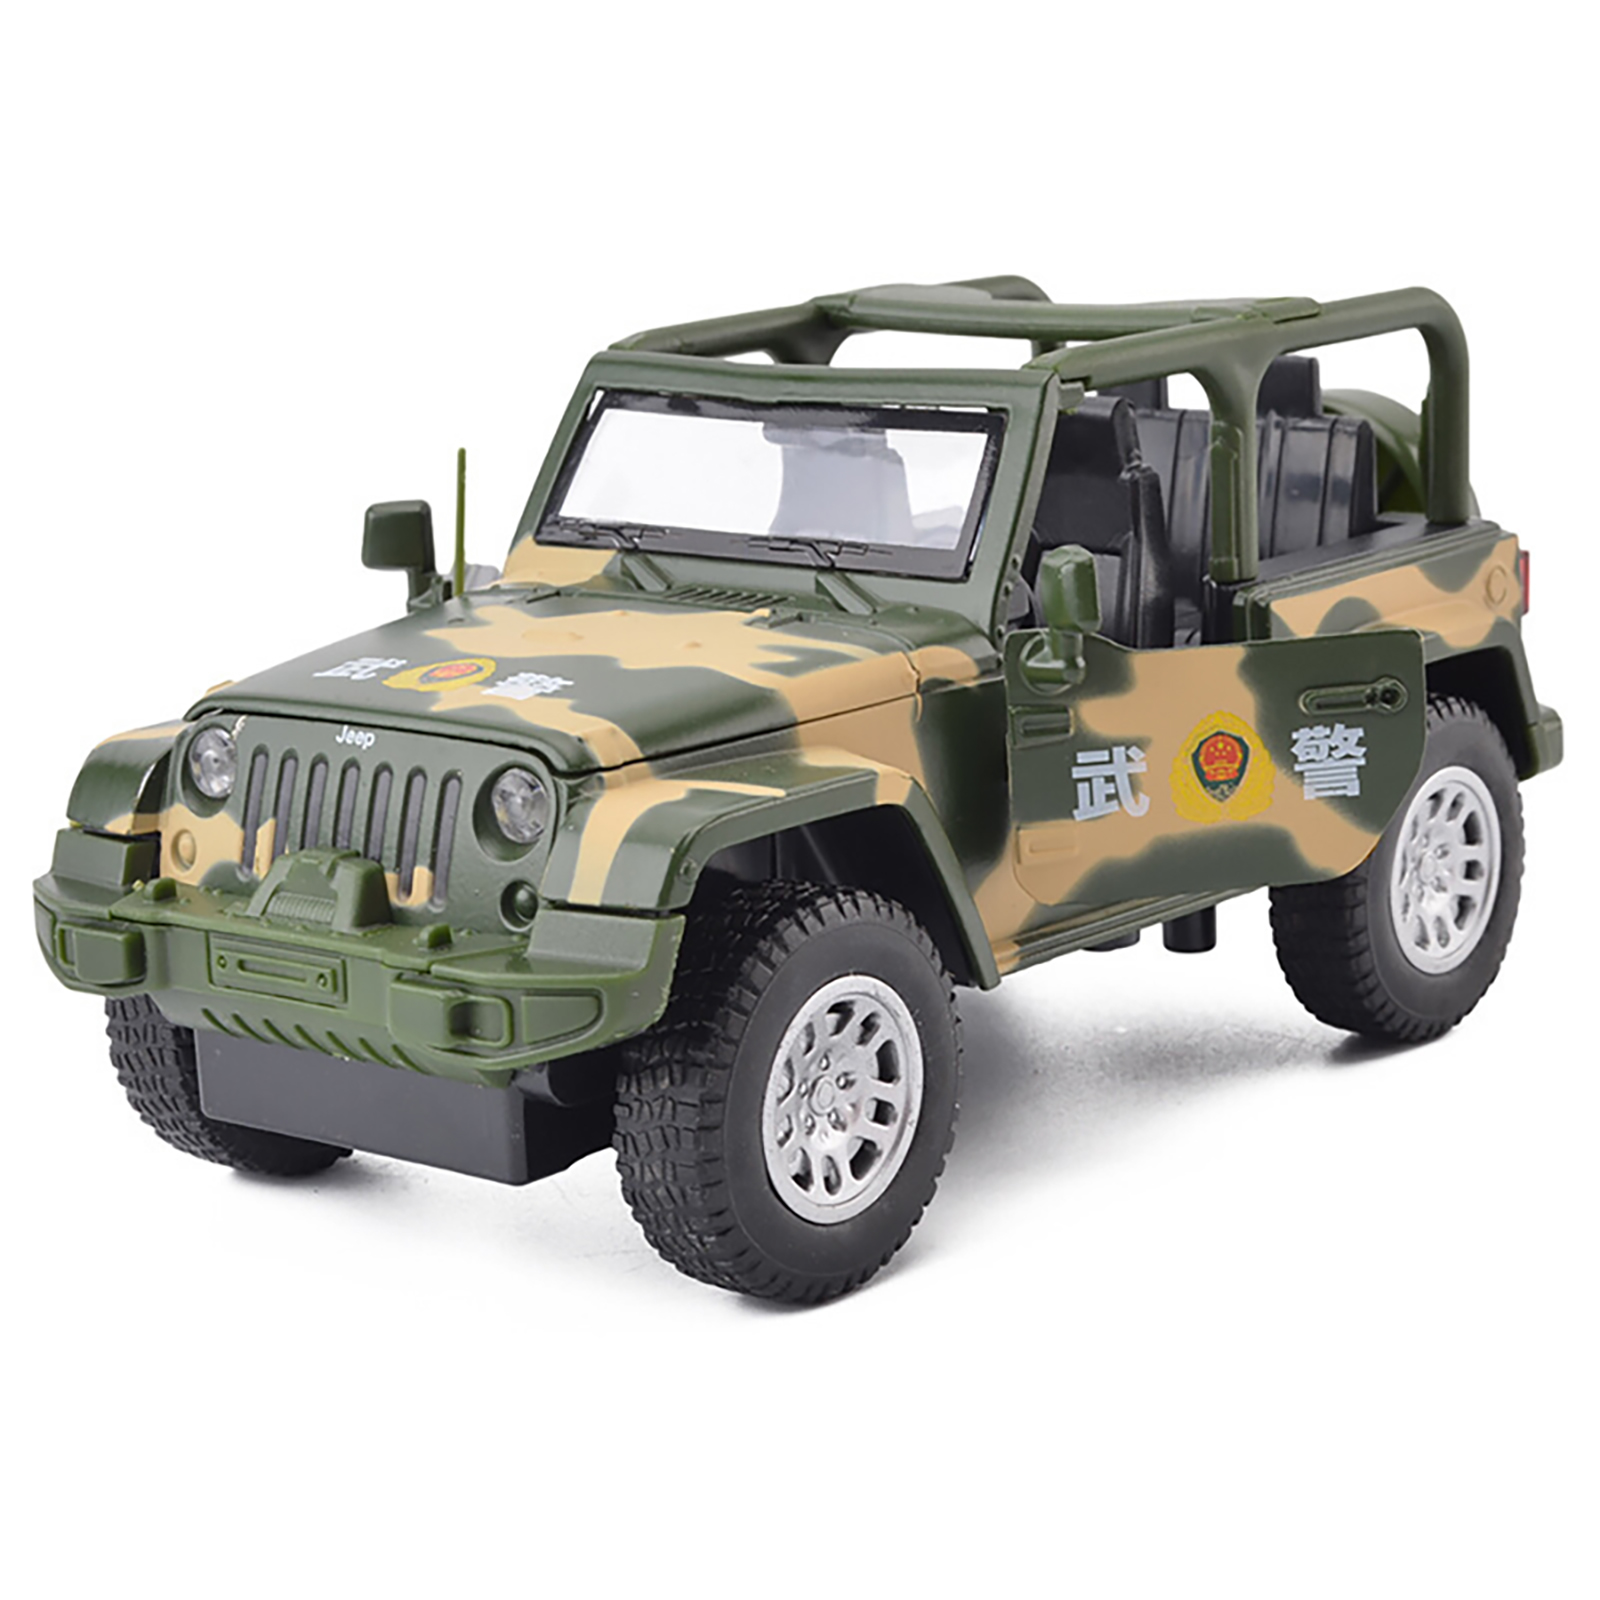 1:32 Simulation Alloy Car With Sound Light Simulation Pull-back Diecast Off-road Vehicle With Openable Door For Kids Gifts Collection